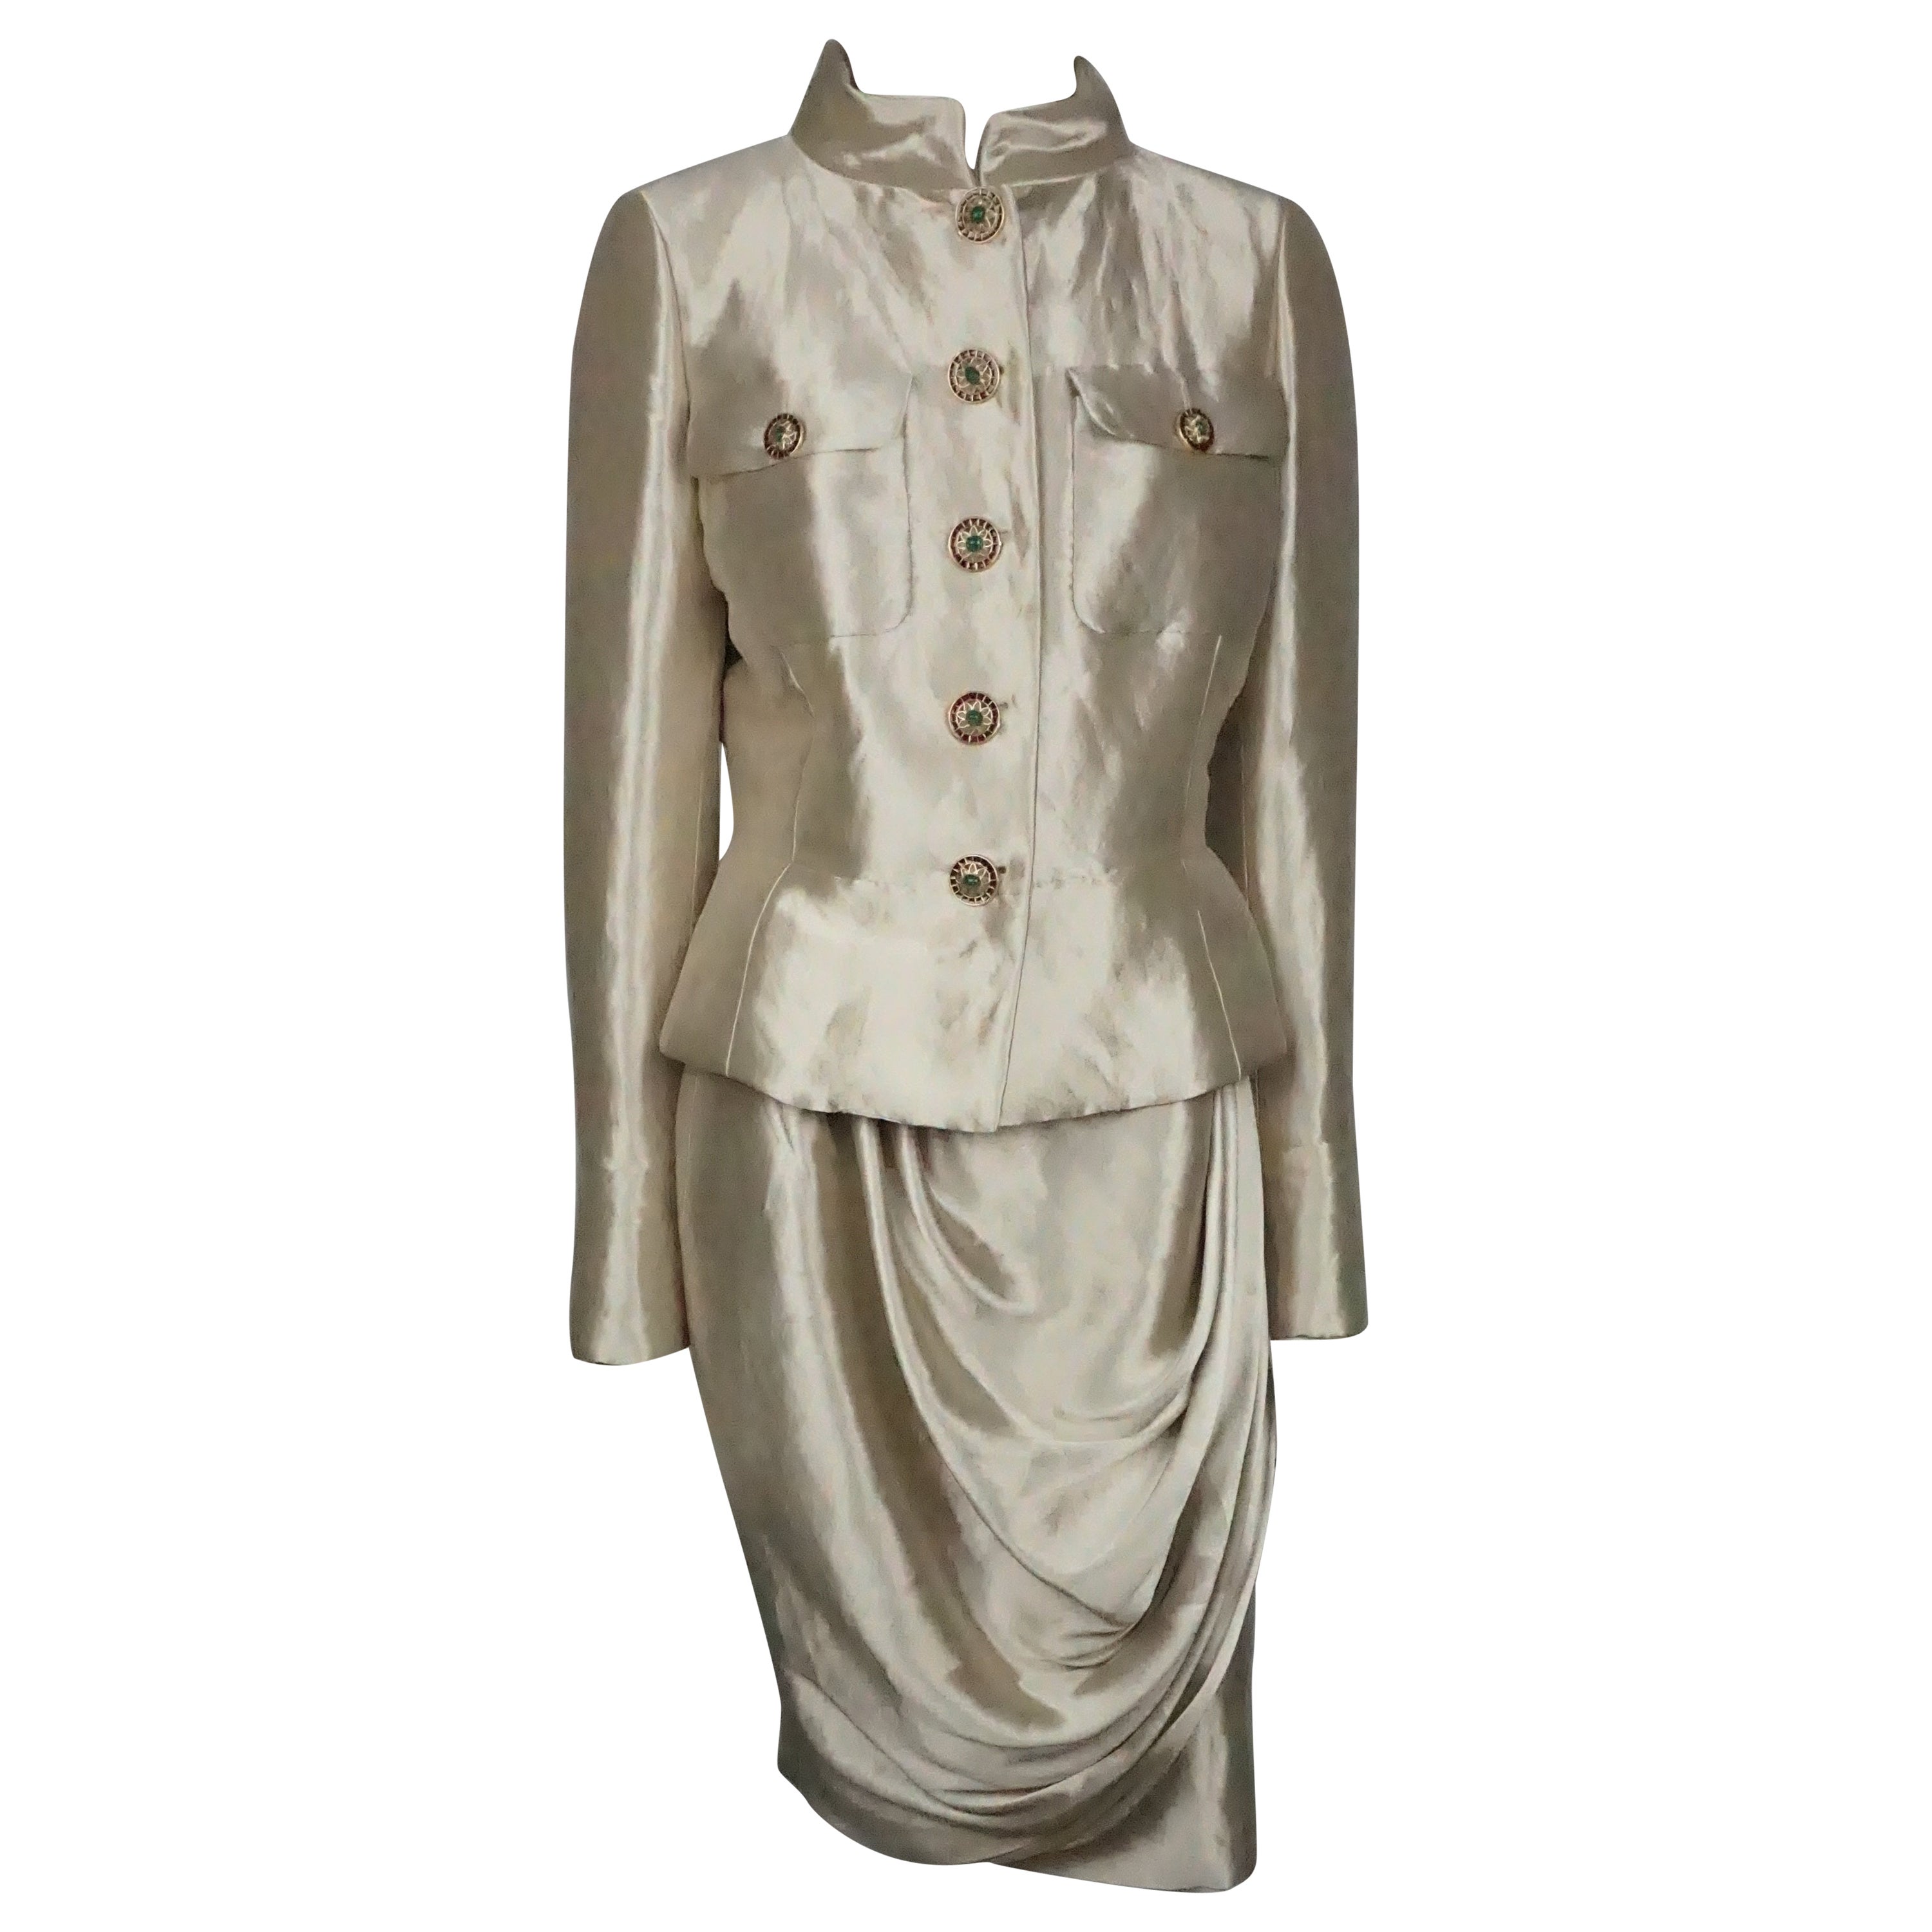 Chanel Gold Metallic Silk Lame Skirt Suit with Gripoix Buttons - Size 40 